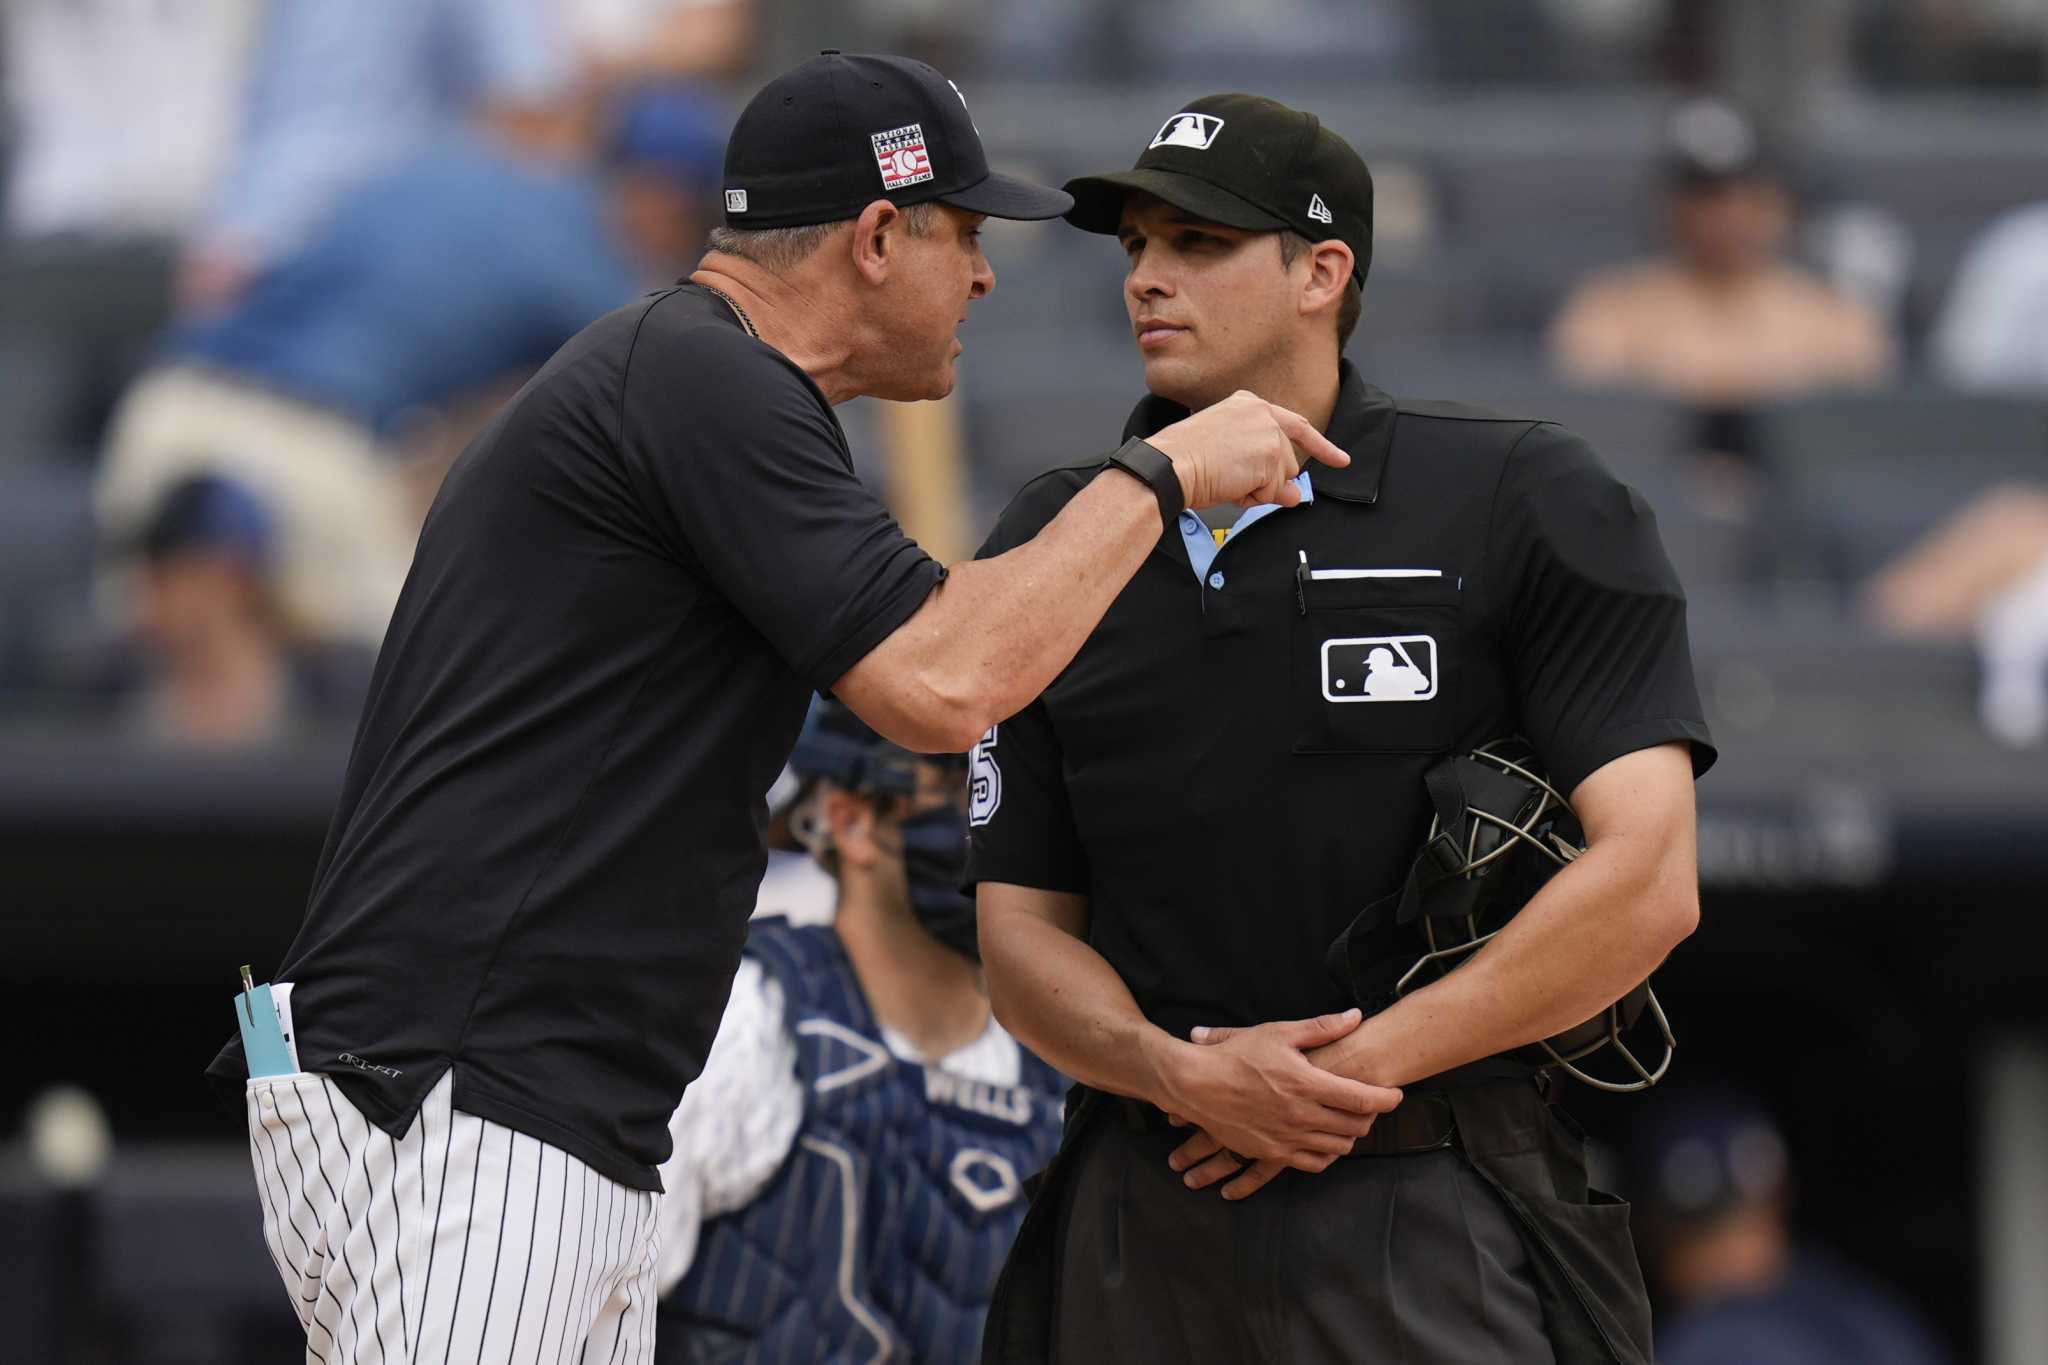 Yankees manager Aaron Boone ejected for 5th time this season as Rays beat New York 6-4